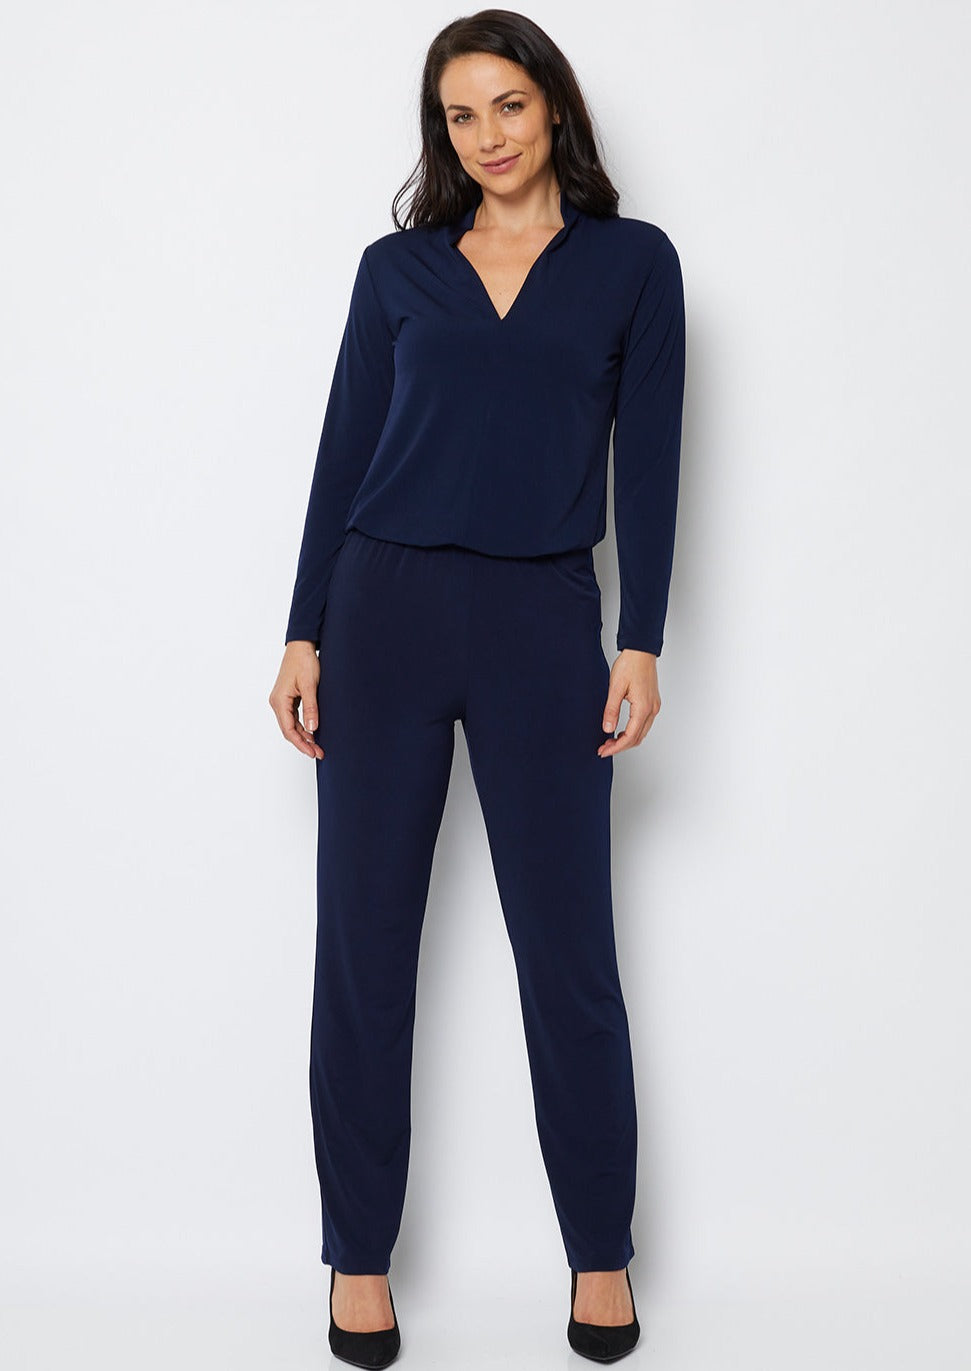 Linear Jersey pant in Ink Navy